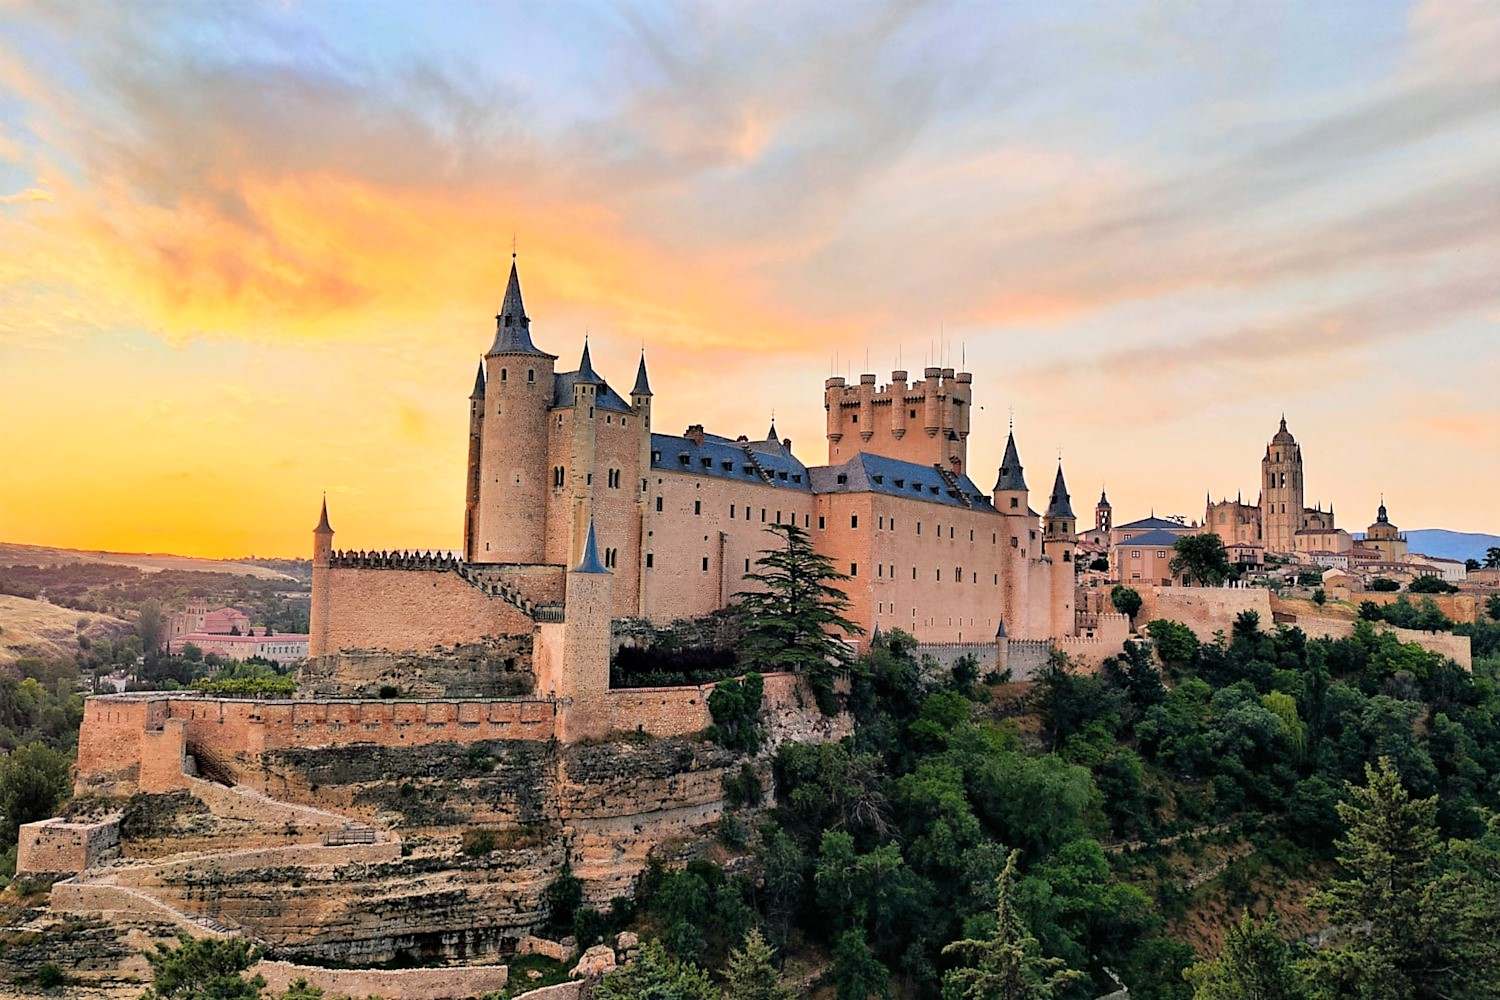 Image of a castle in Spain during a long private tour